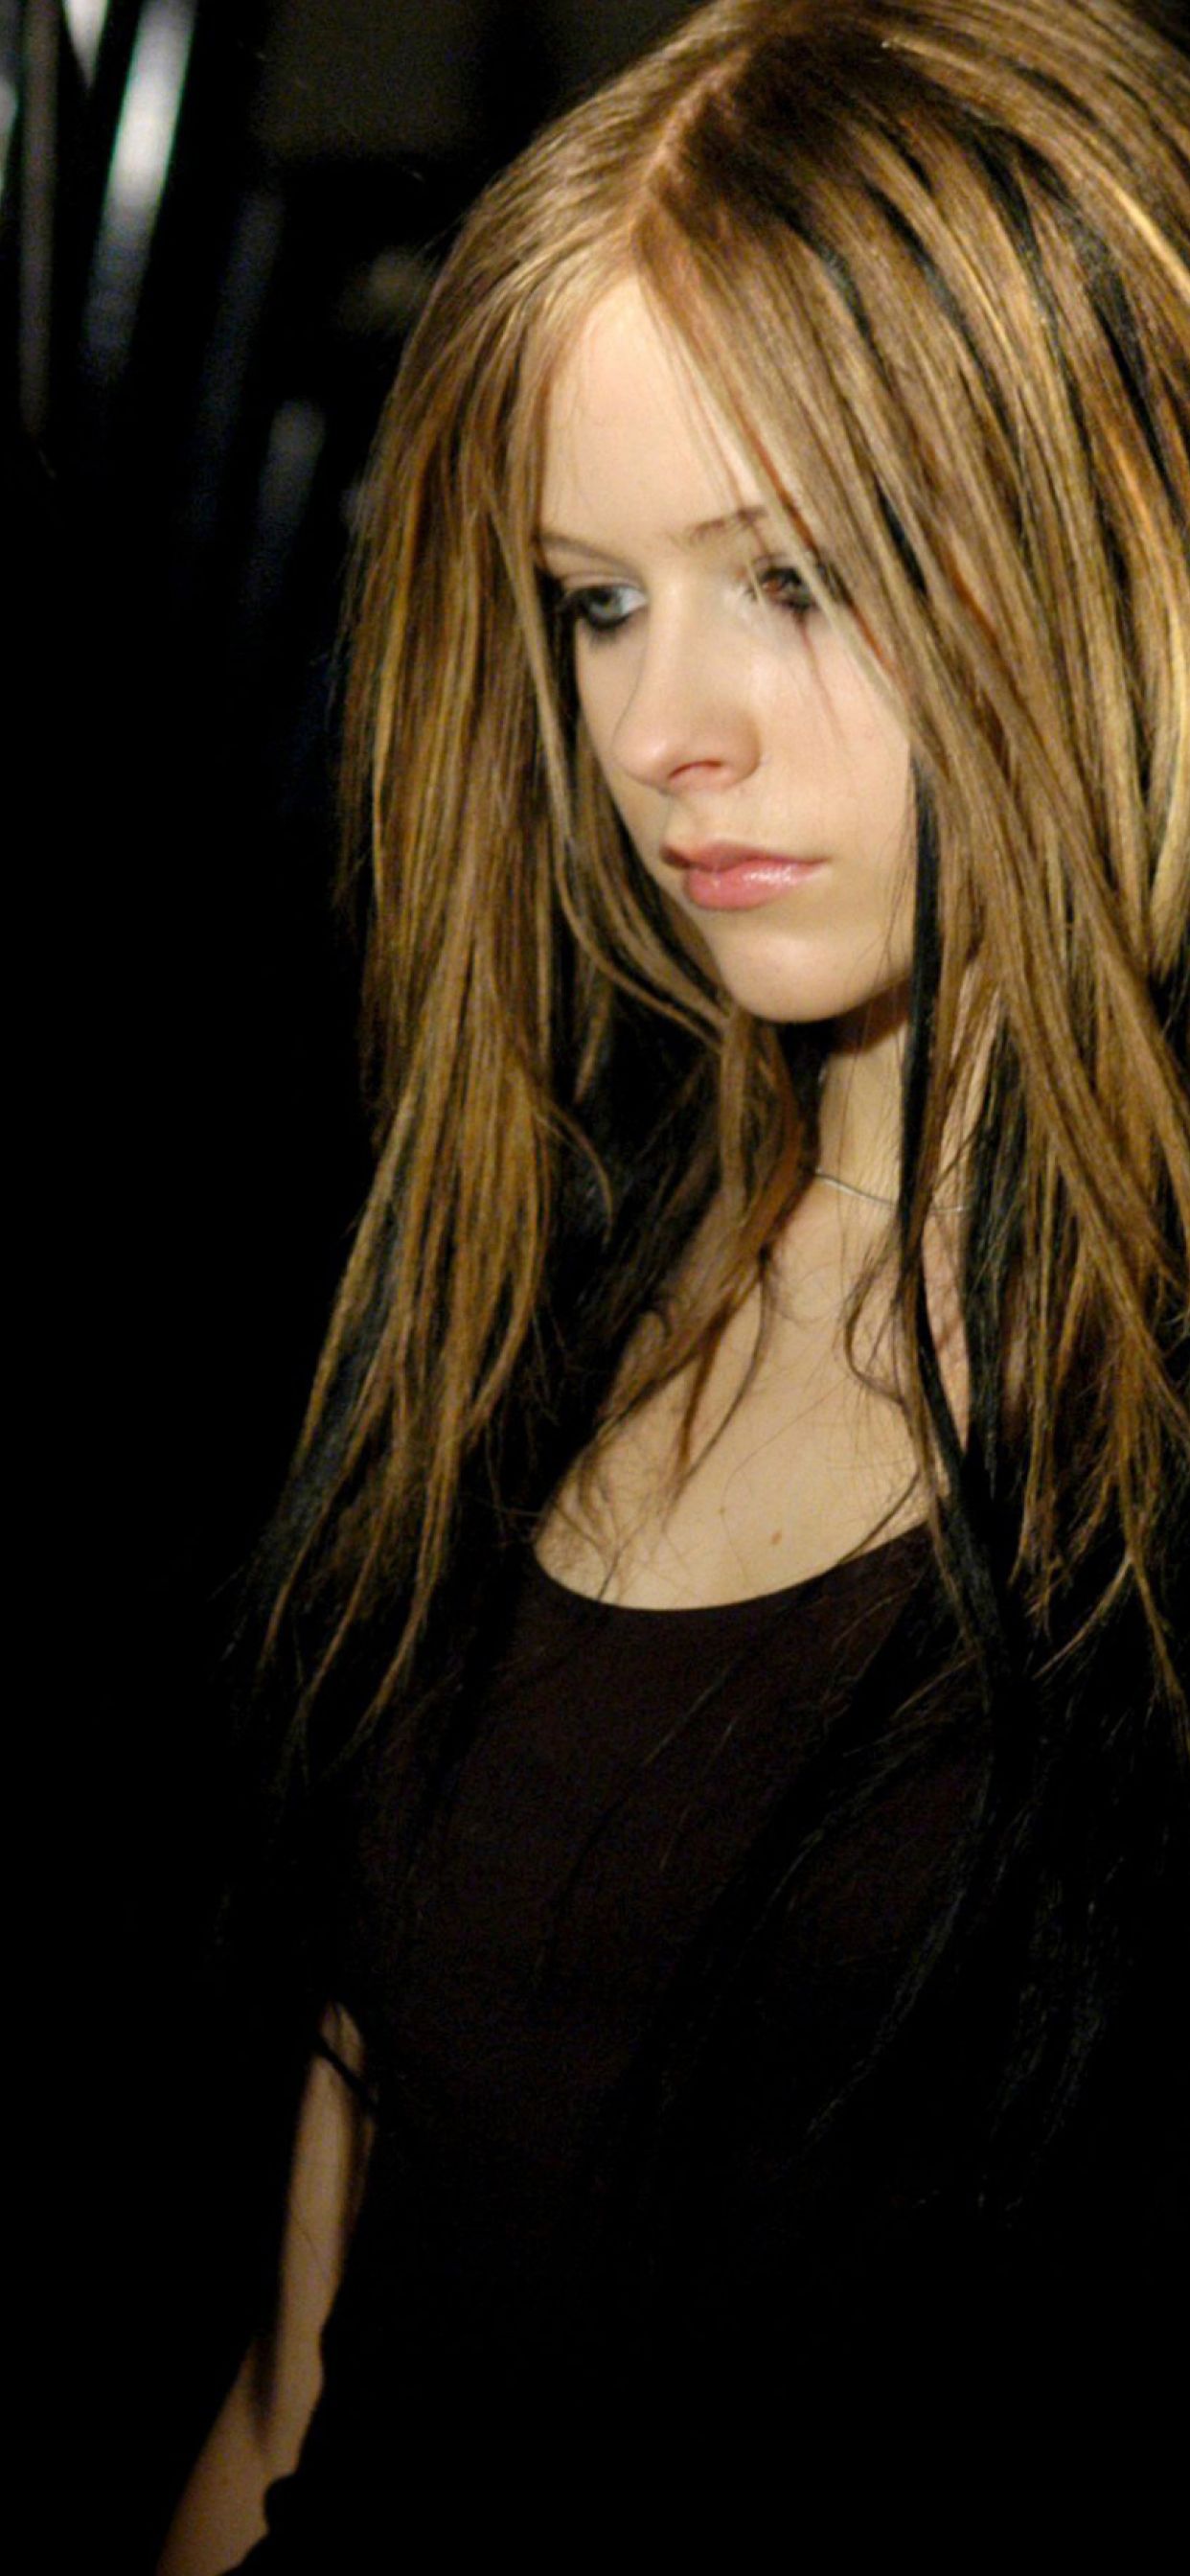 Avril Lavigne Iphone Wallpapers Wallpaper Cave